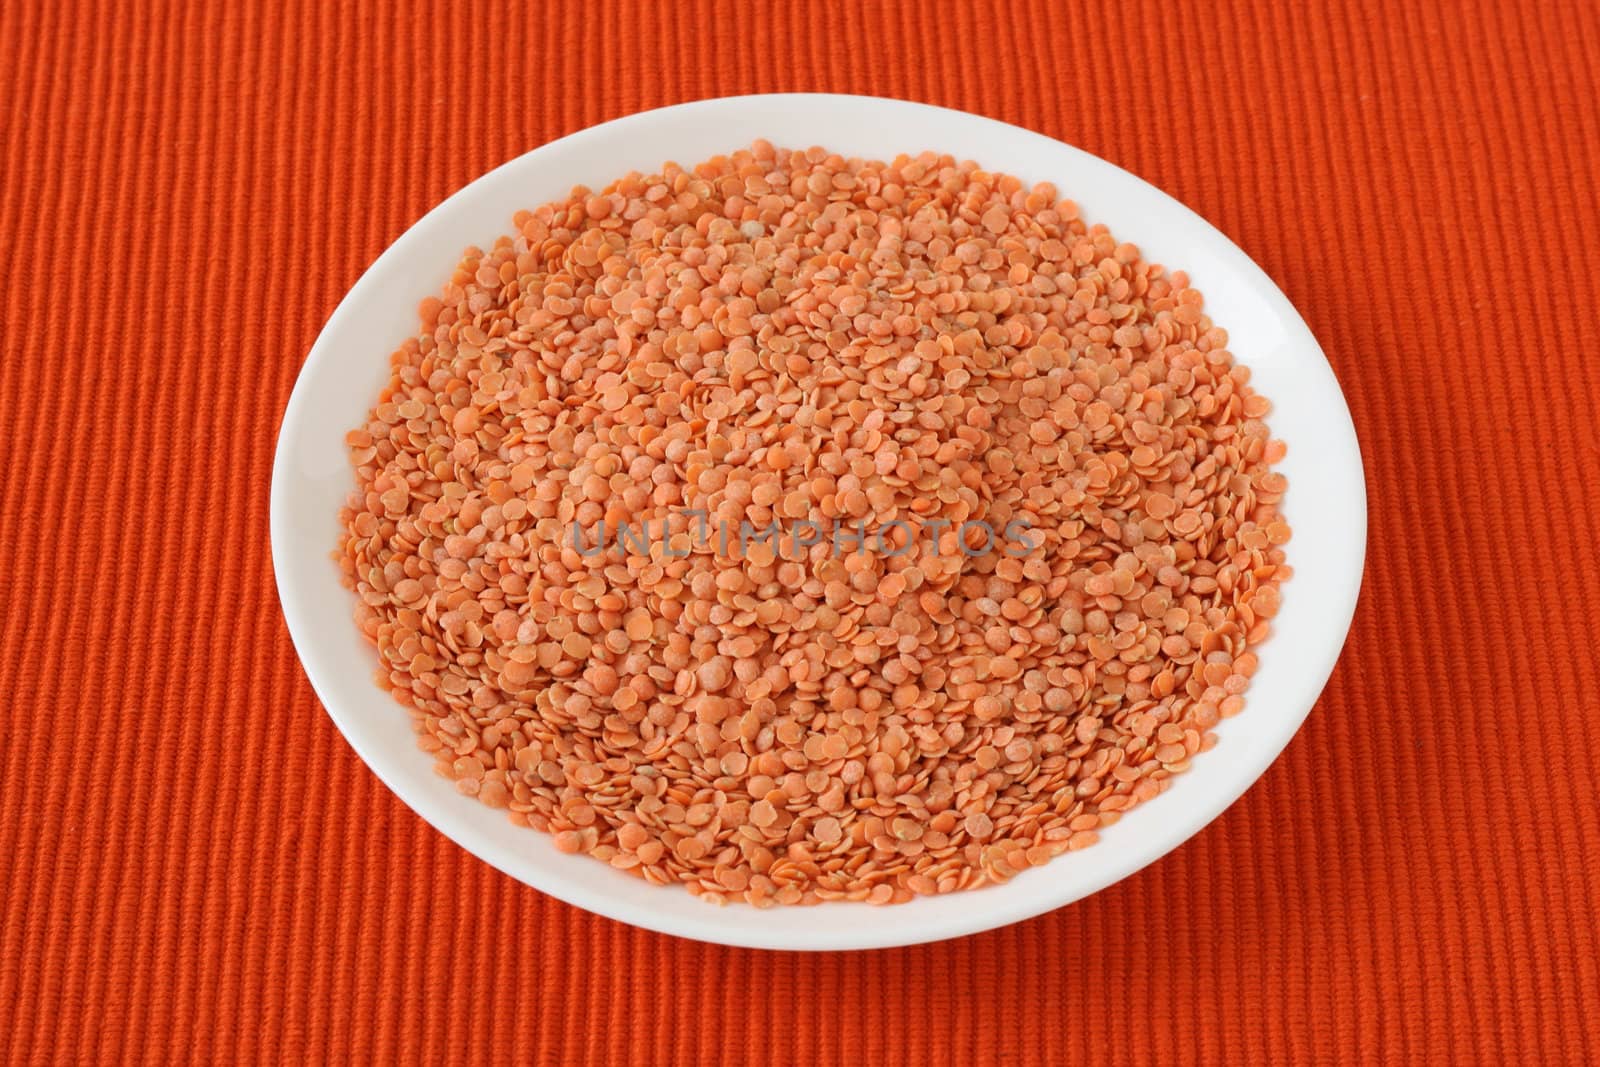 dry red lentil on the plate